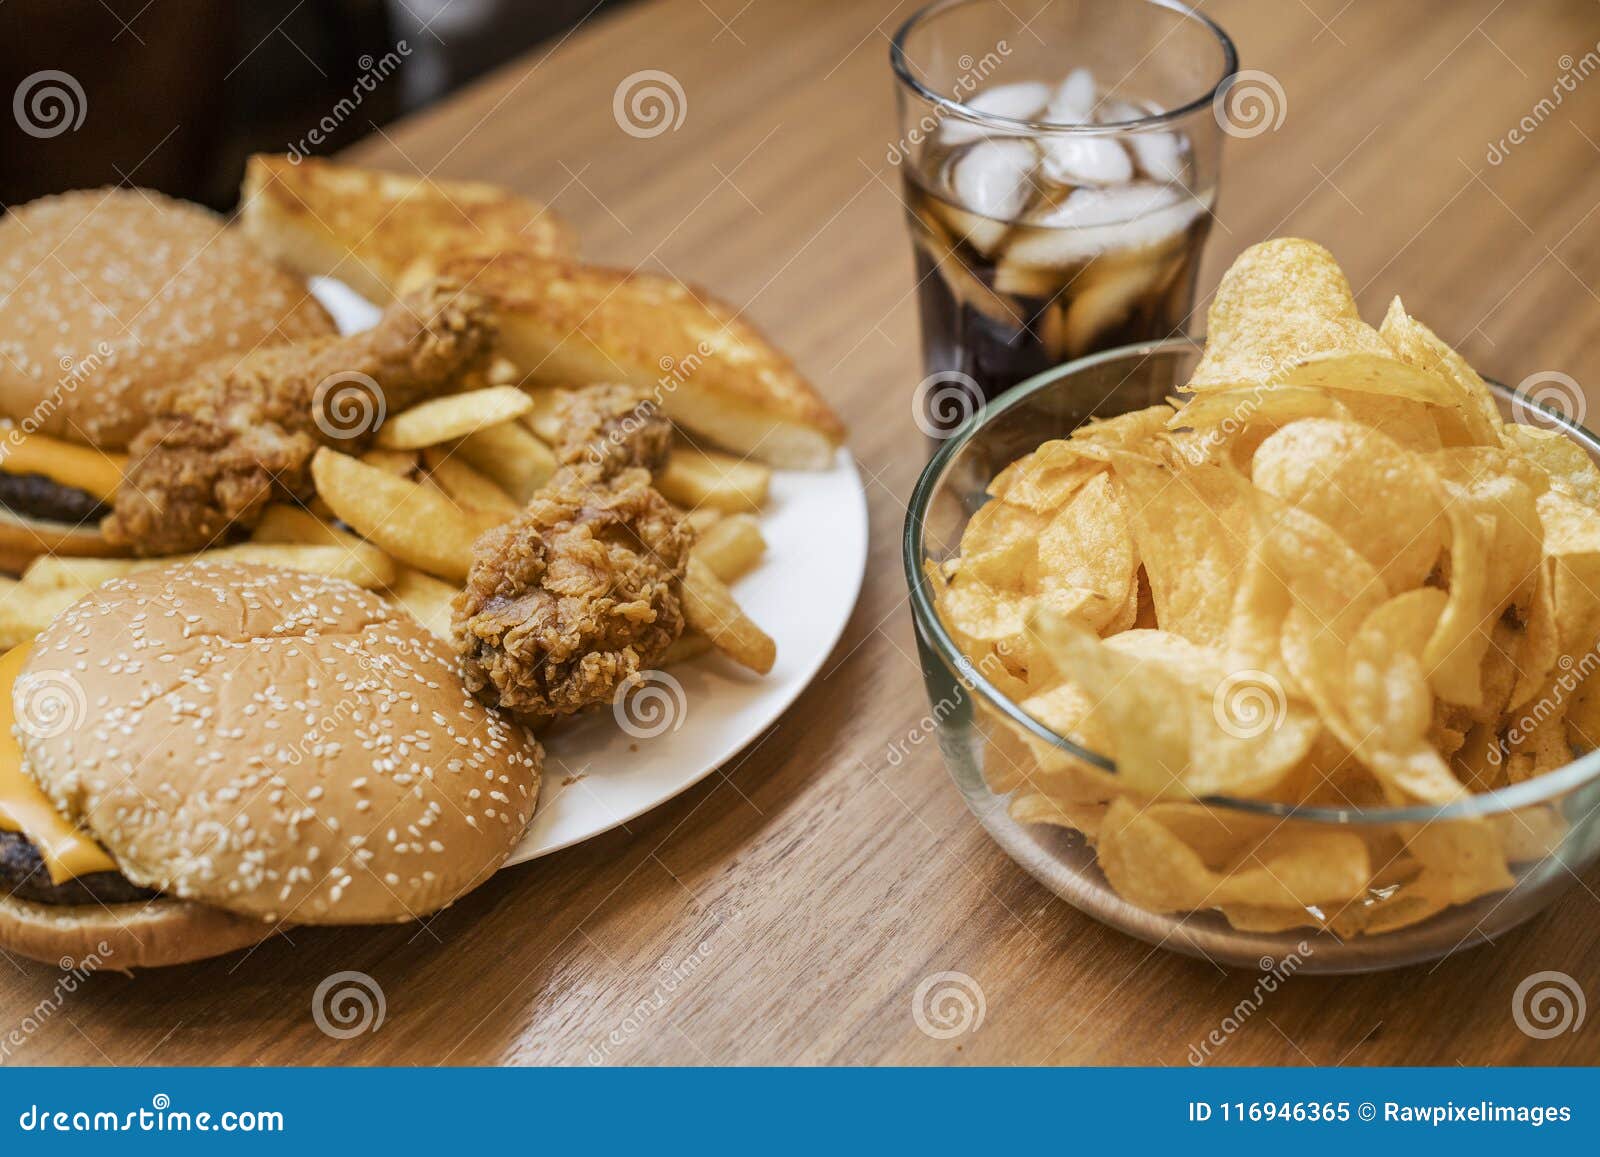 fattening and unhealthy fast food on the table